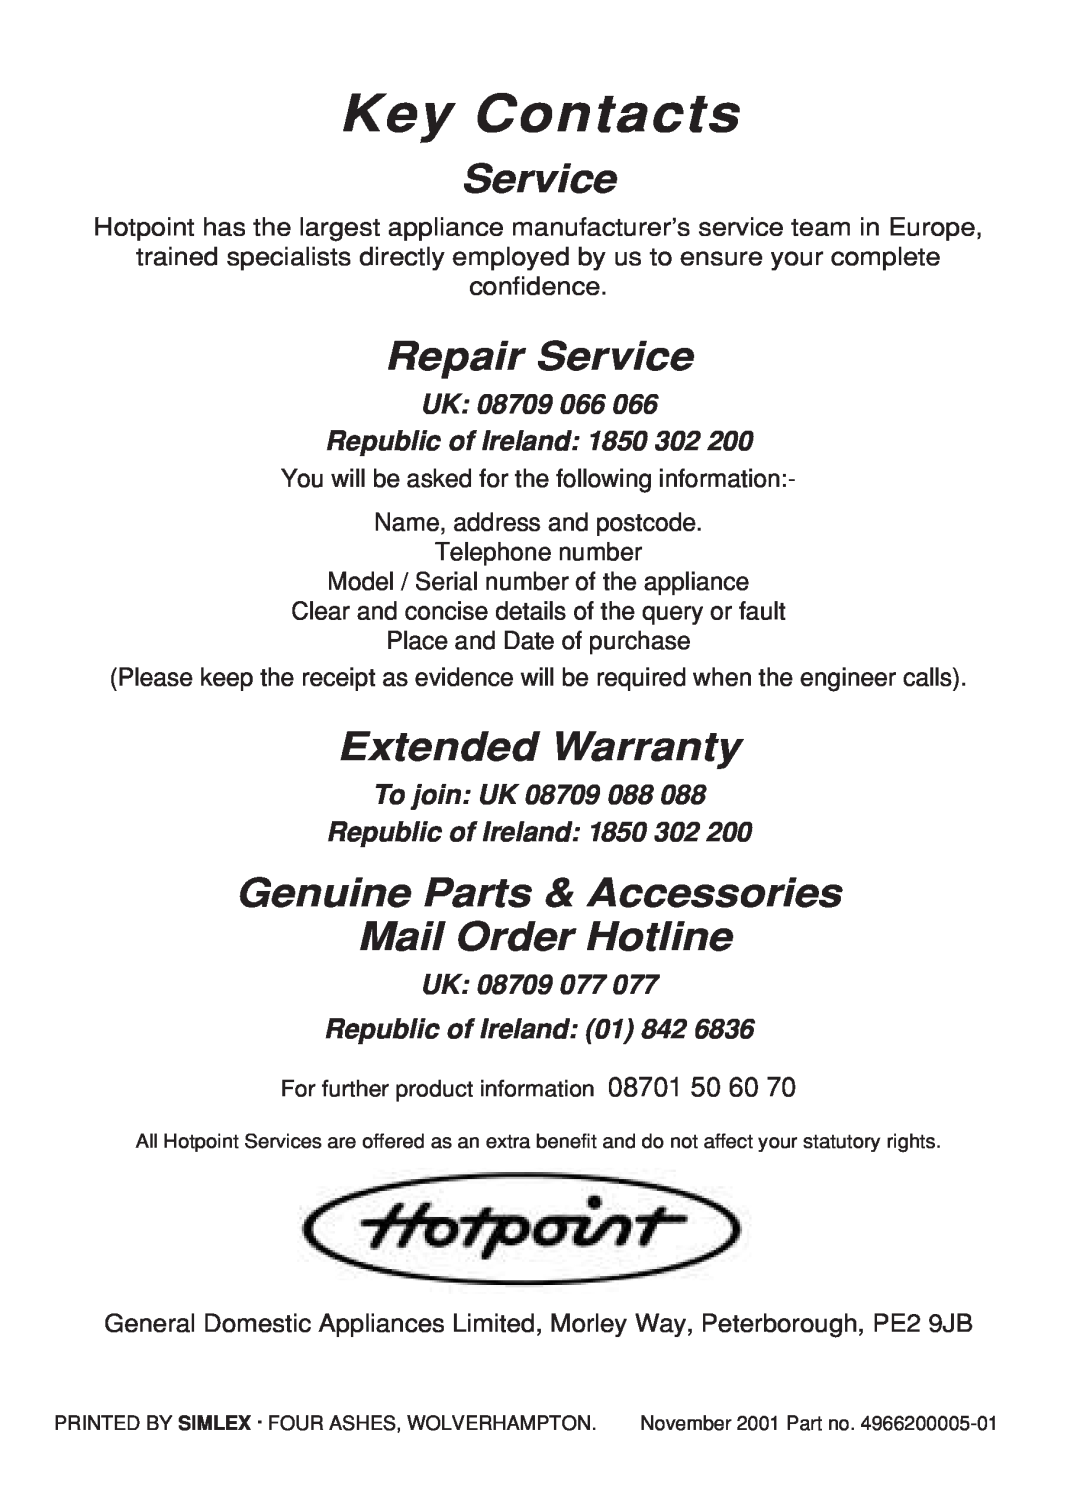 Hotpoint EG21 manual Key Contacts, Repair Service, Extended Warranty, Genuine Parts & Accessories Mail Order Hotline 